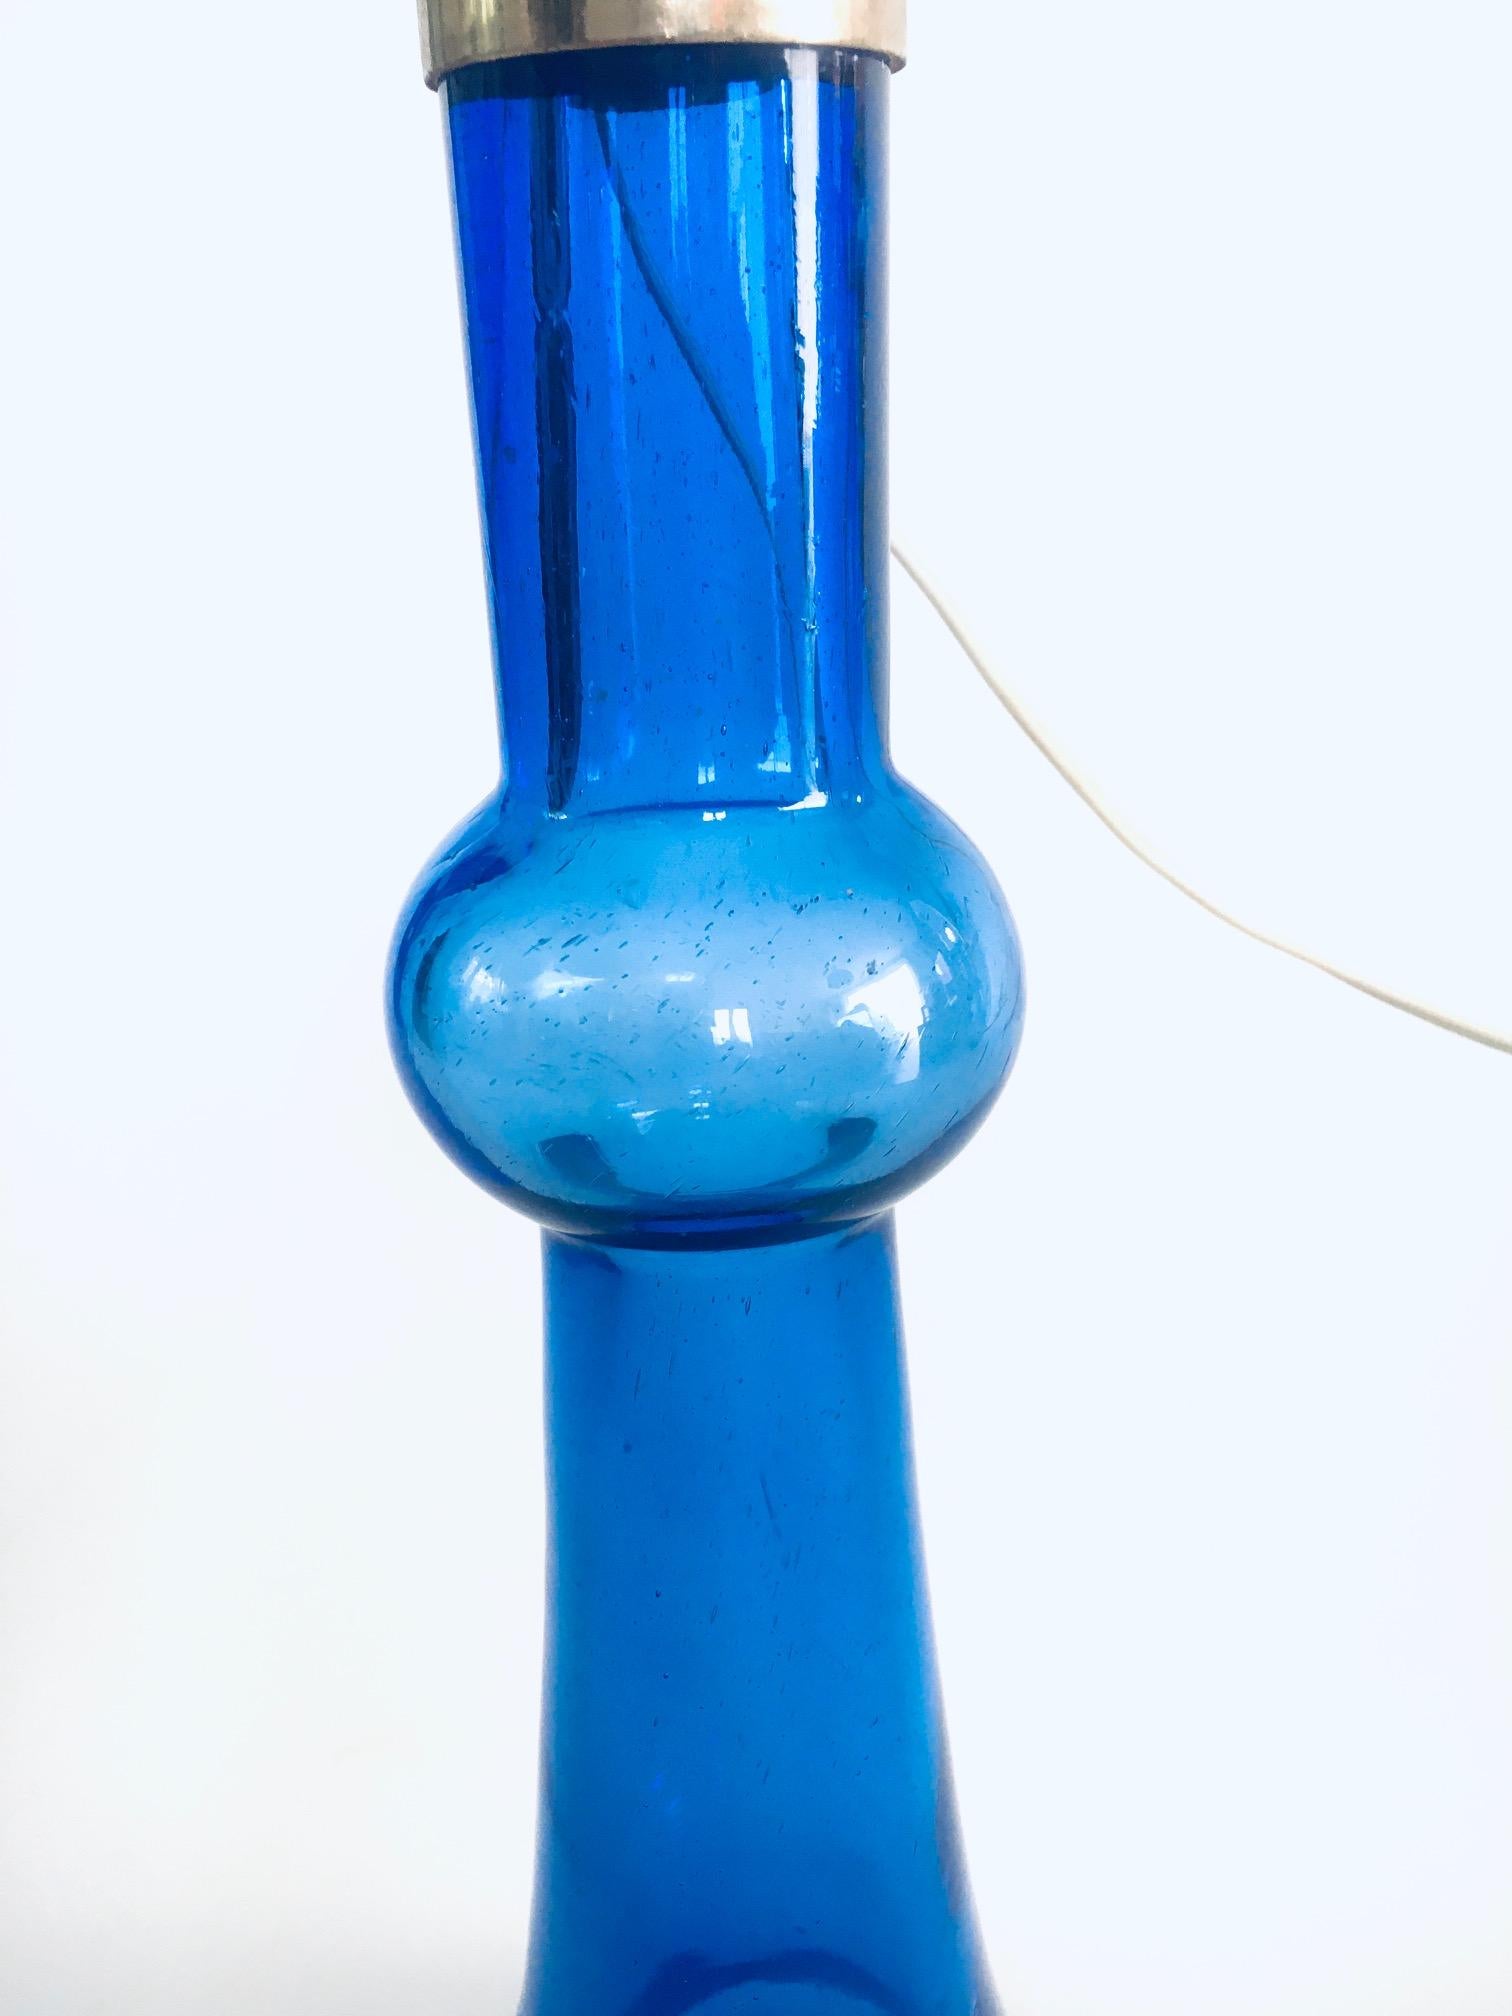 Mid-20th Century Midcentury Design Blue Glass Table Lamp by Nanny Still for Raak, 1960's For Sale